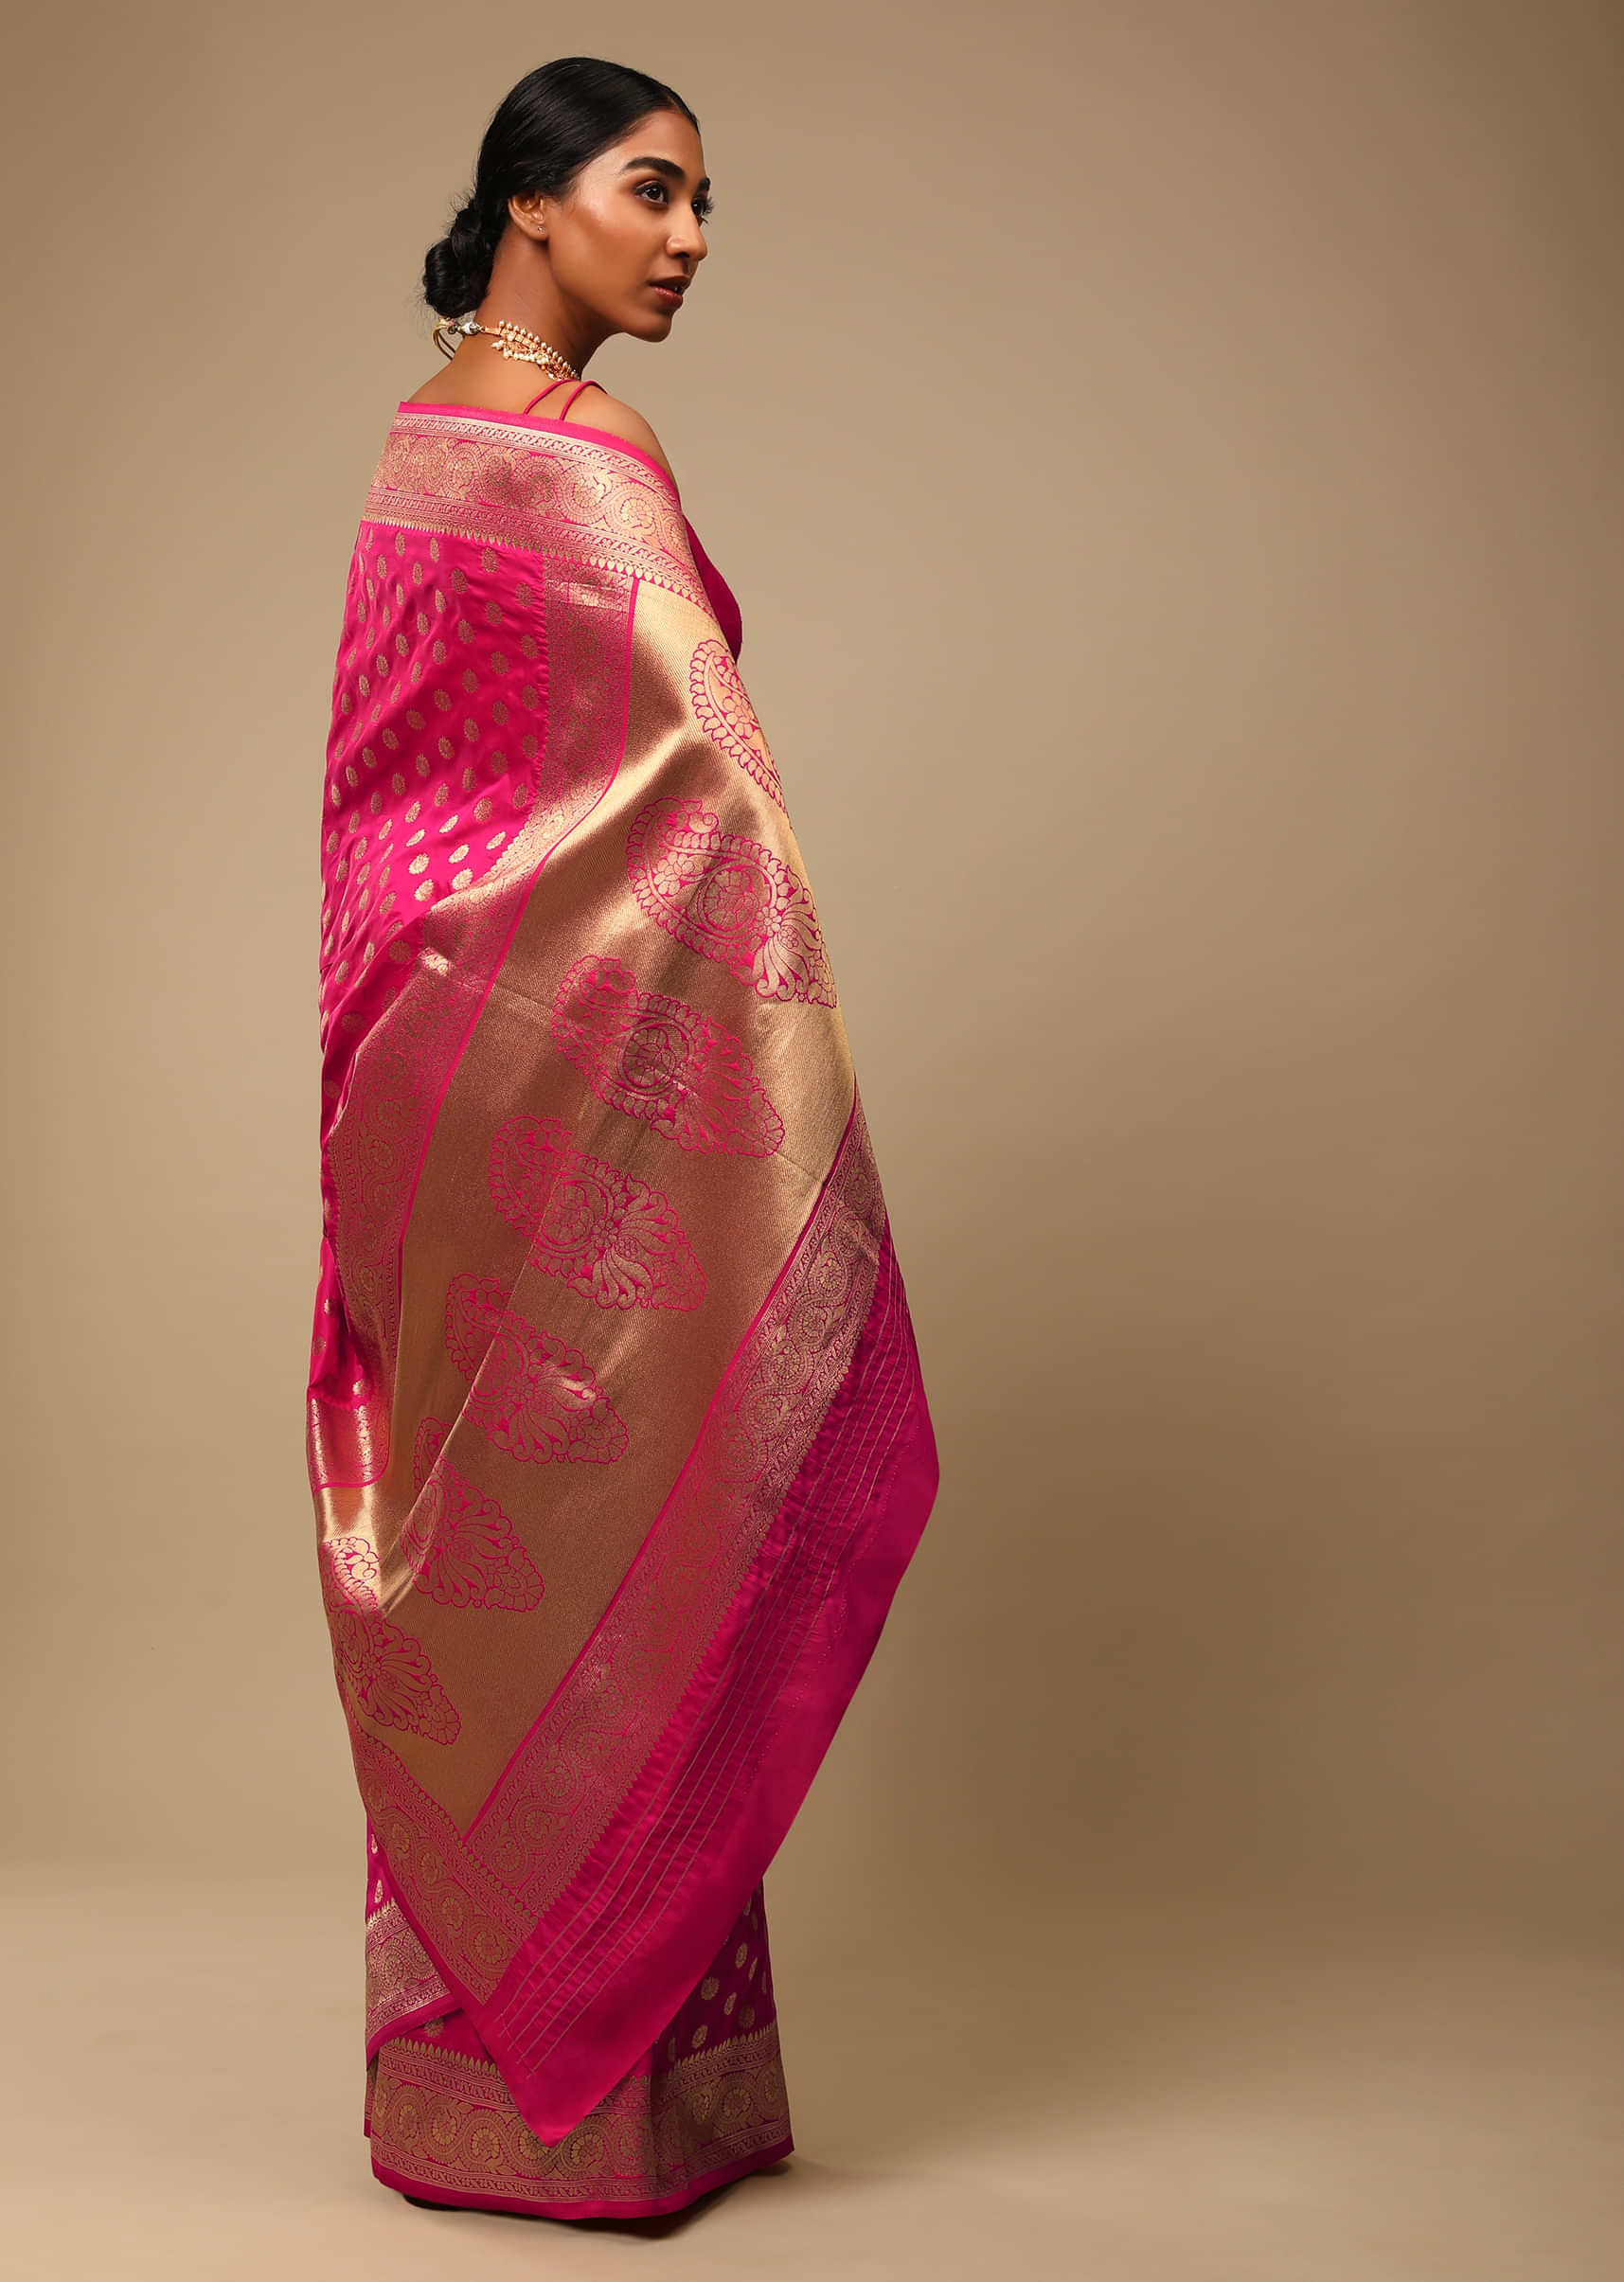 Hot Pink Saree In Art Handloom Silk With Woven Floral Buttis, Paisley Motifs On The Pallu And Unstitched Blouse  